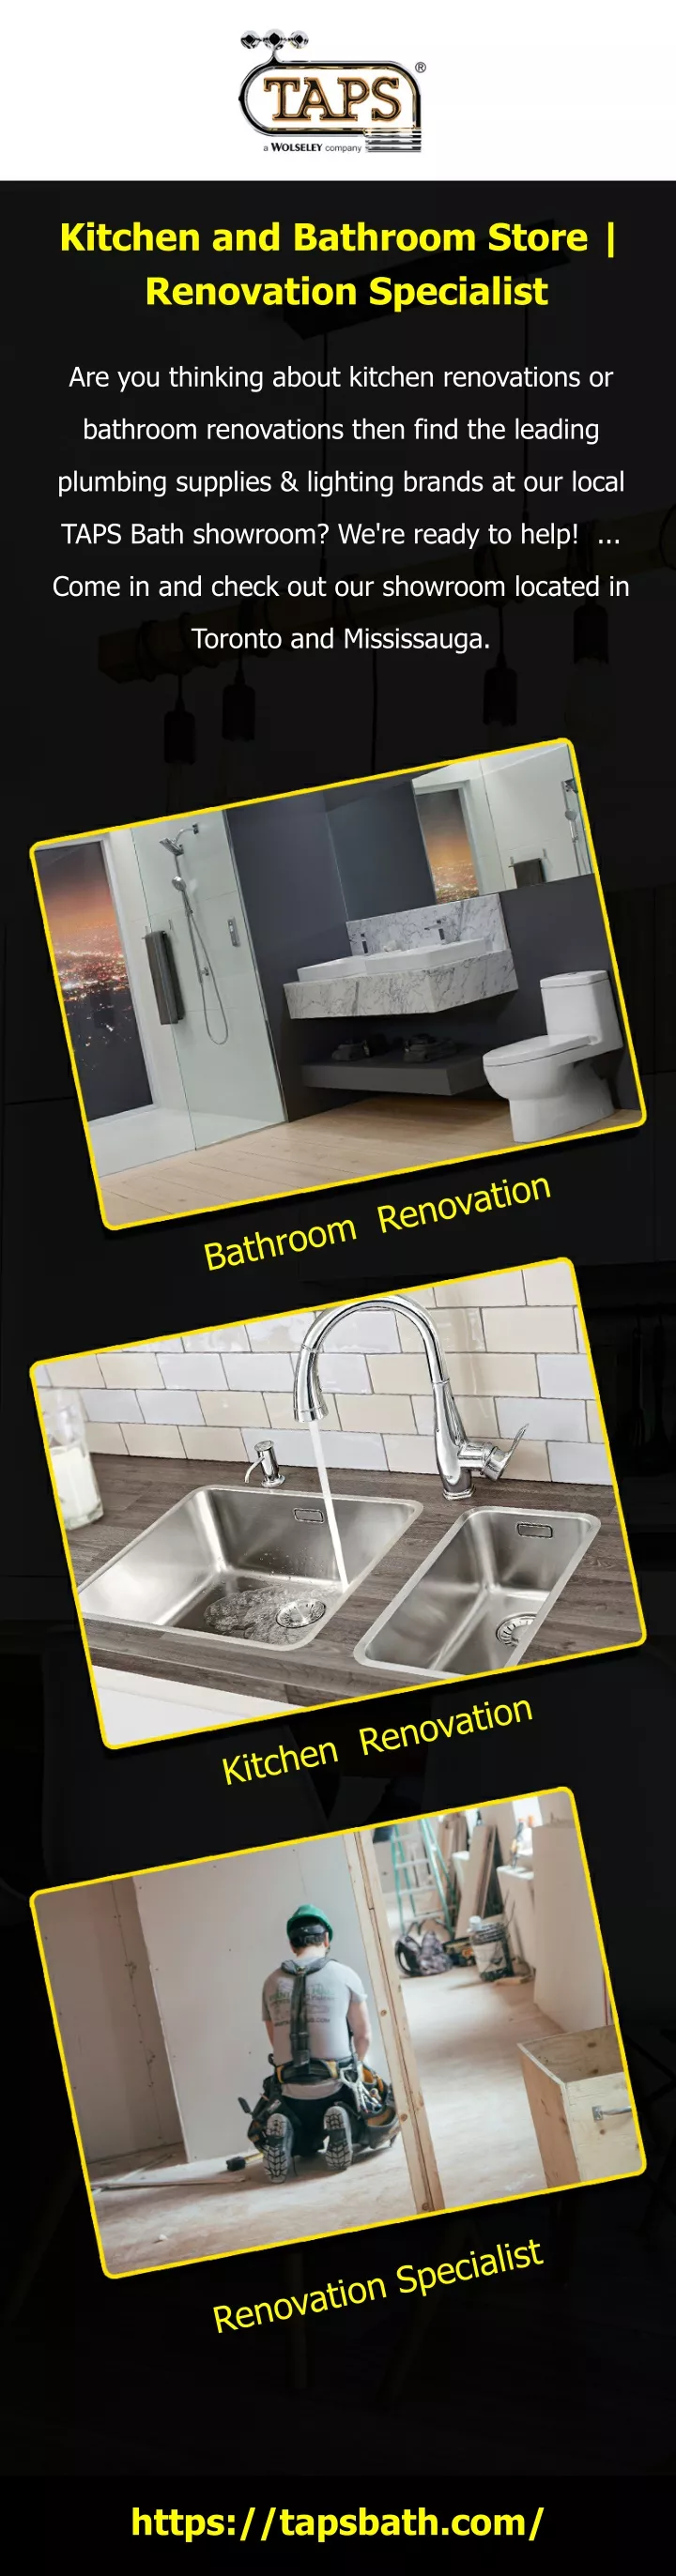 kitchen and bathroom store renovation specialist